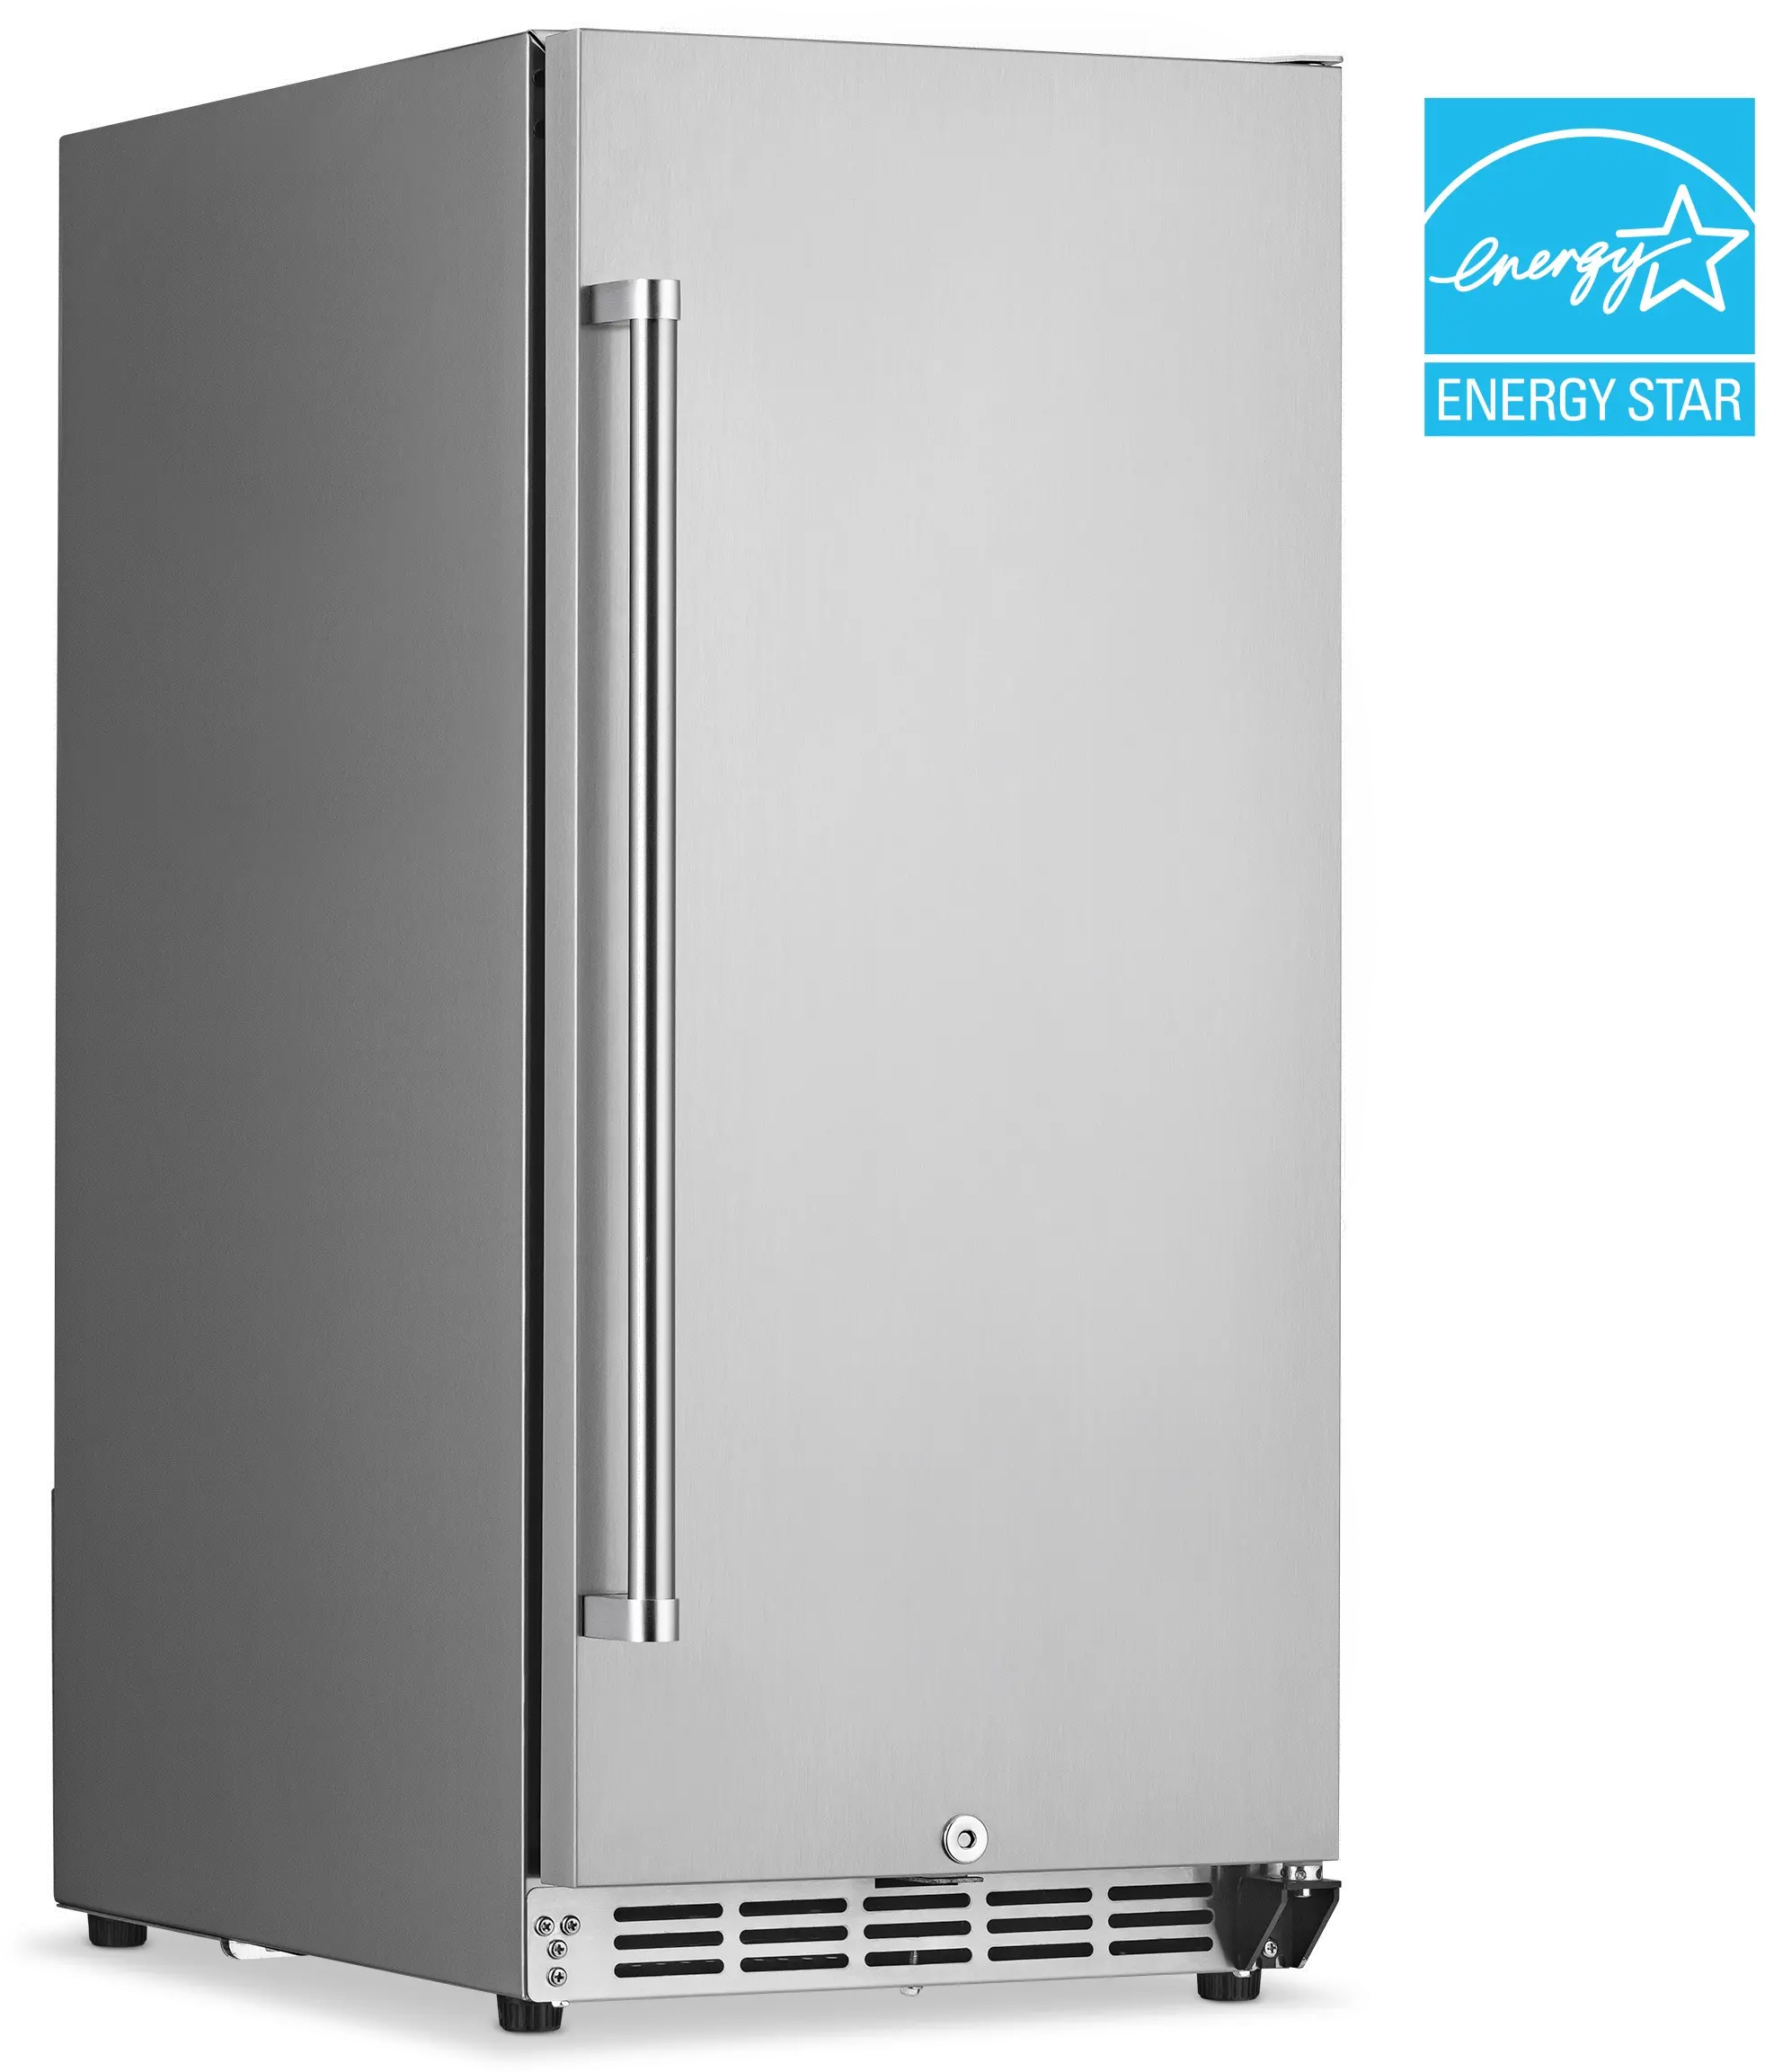 Photos - Wine Cooler NewAir New Air 15" 3.2 cu ft Built-in Beverage Refrigerator -... NCR032SS0